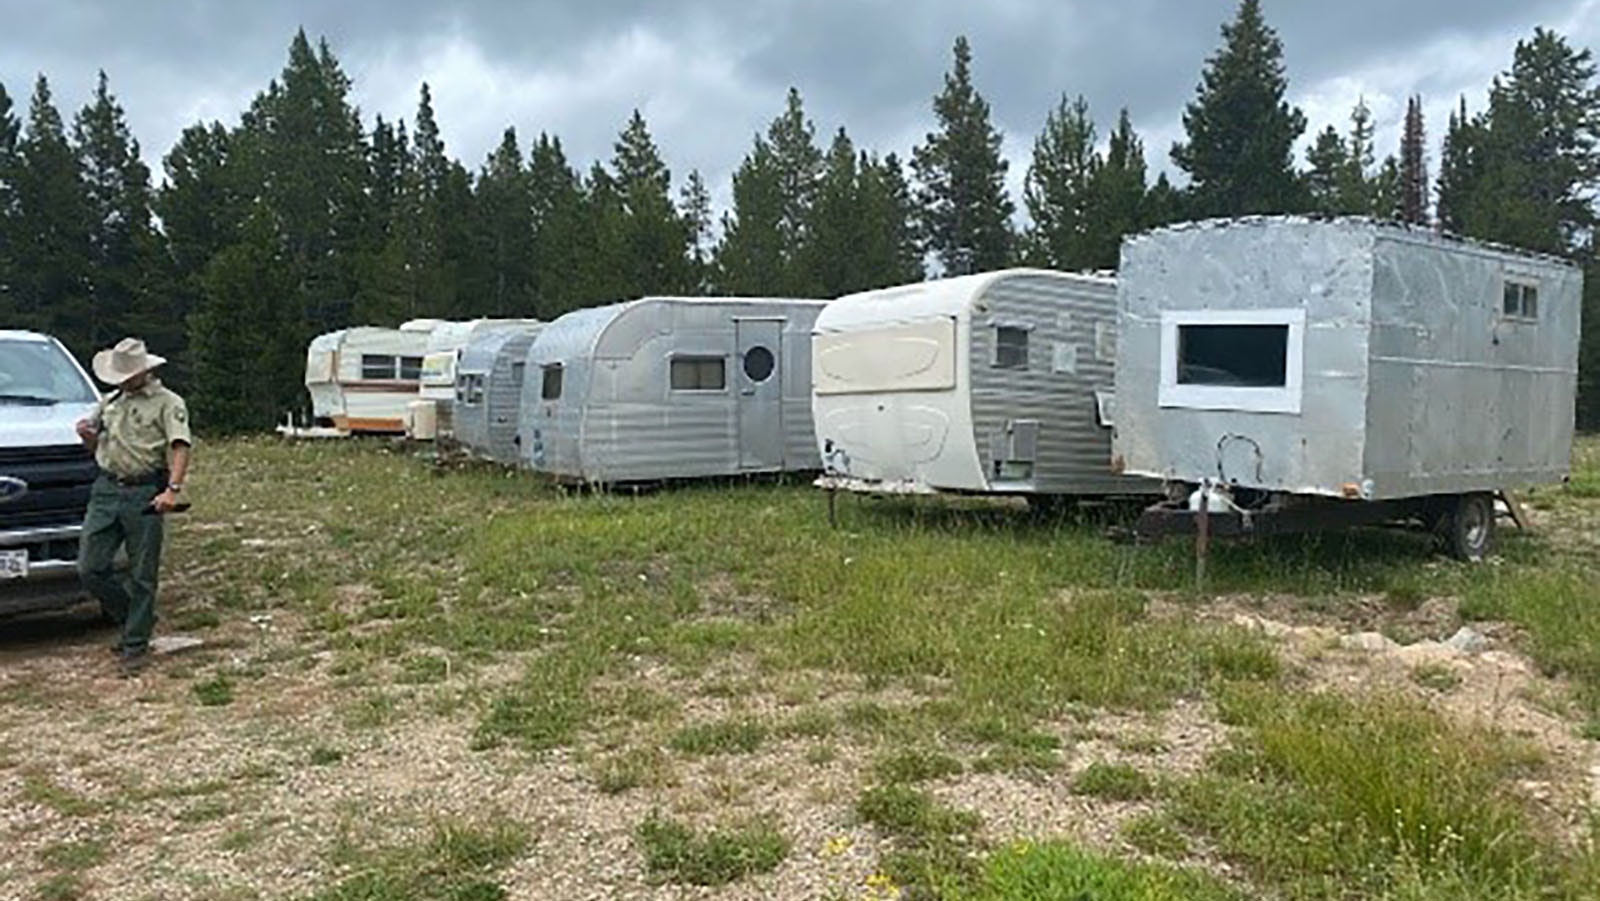 Some campers have been left sitting on Forest Service property near Greybull for so long, animals have started moving into them, and the agency wants the campers gone.